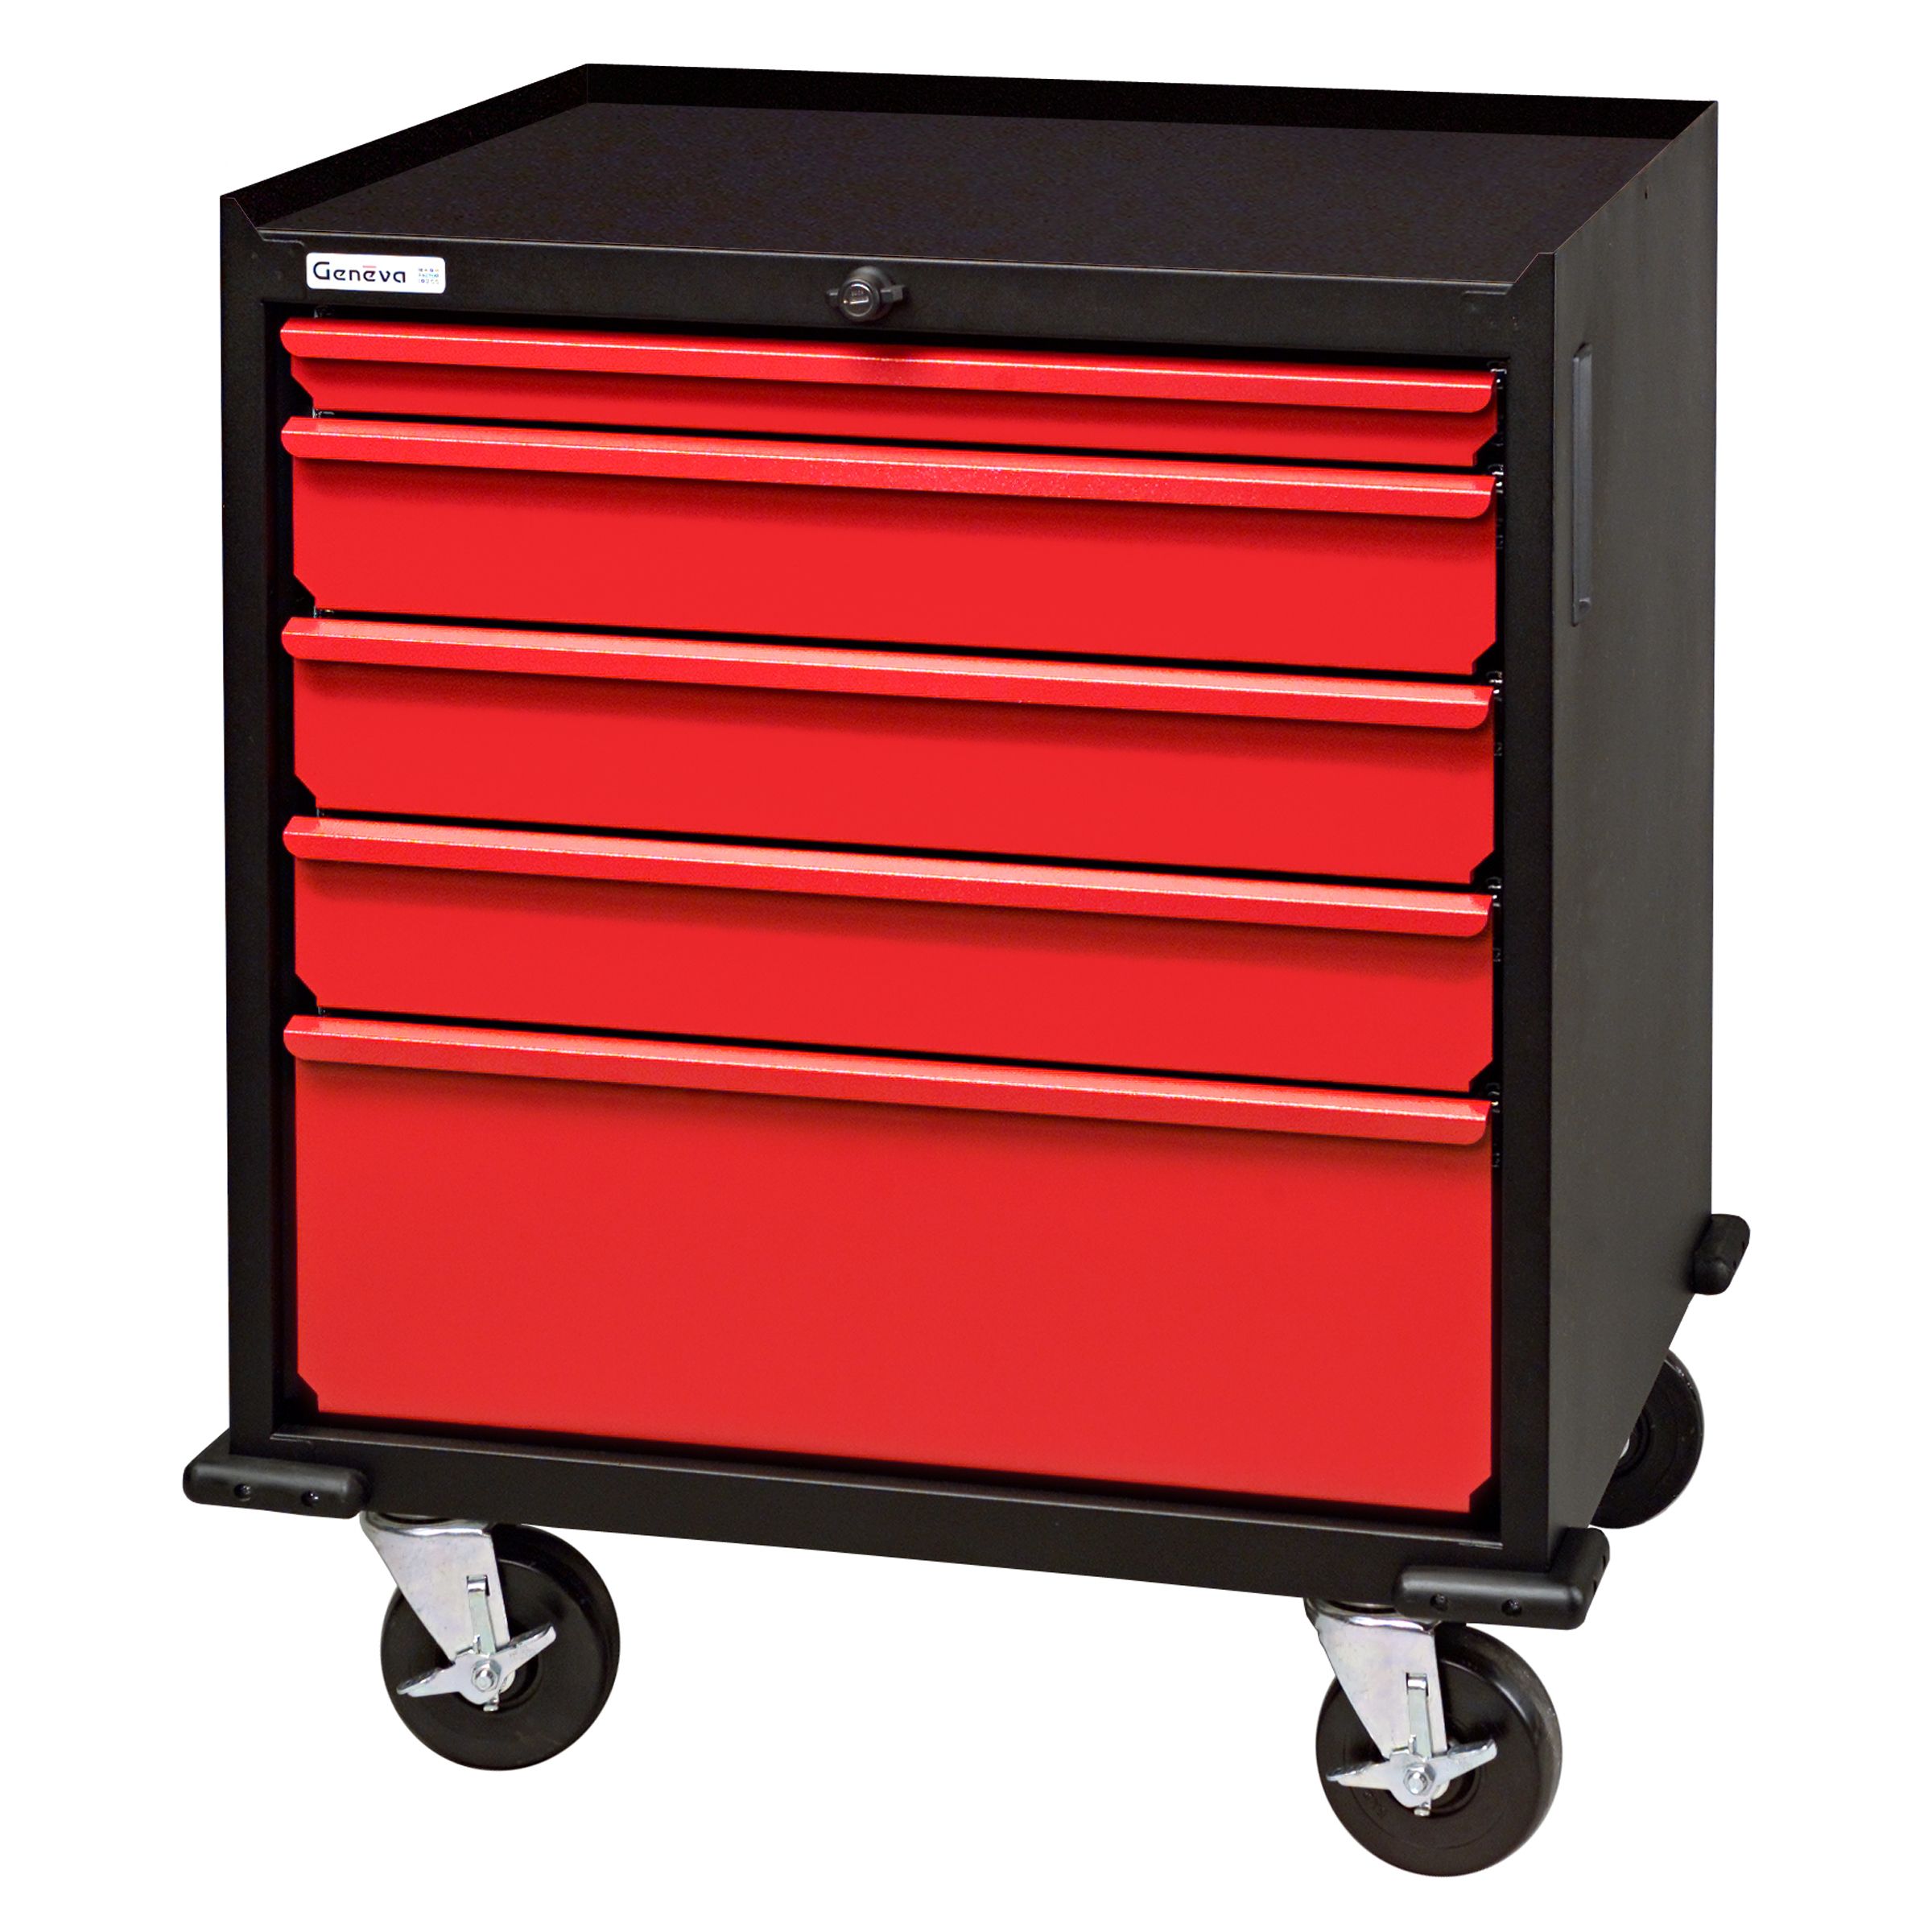 Geneva 5-Drawer Red Roller Cabinet  (shown without optional top -sold separately)- WHILE QUANTITIES LAST!